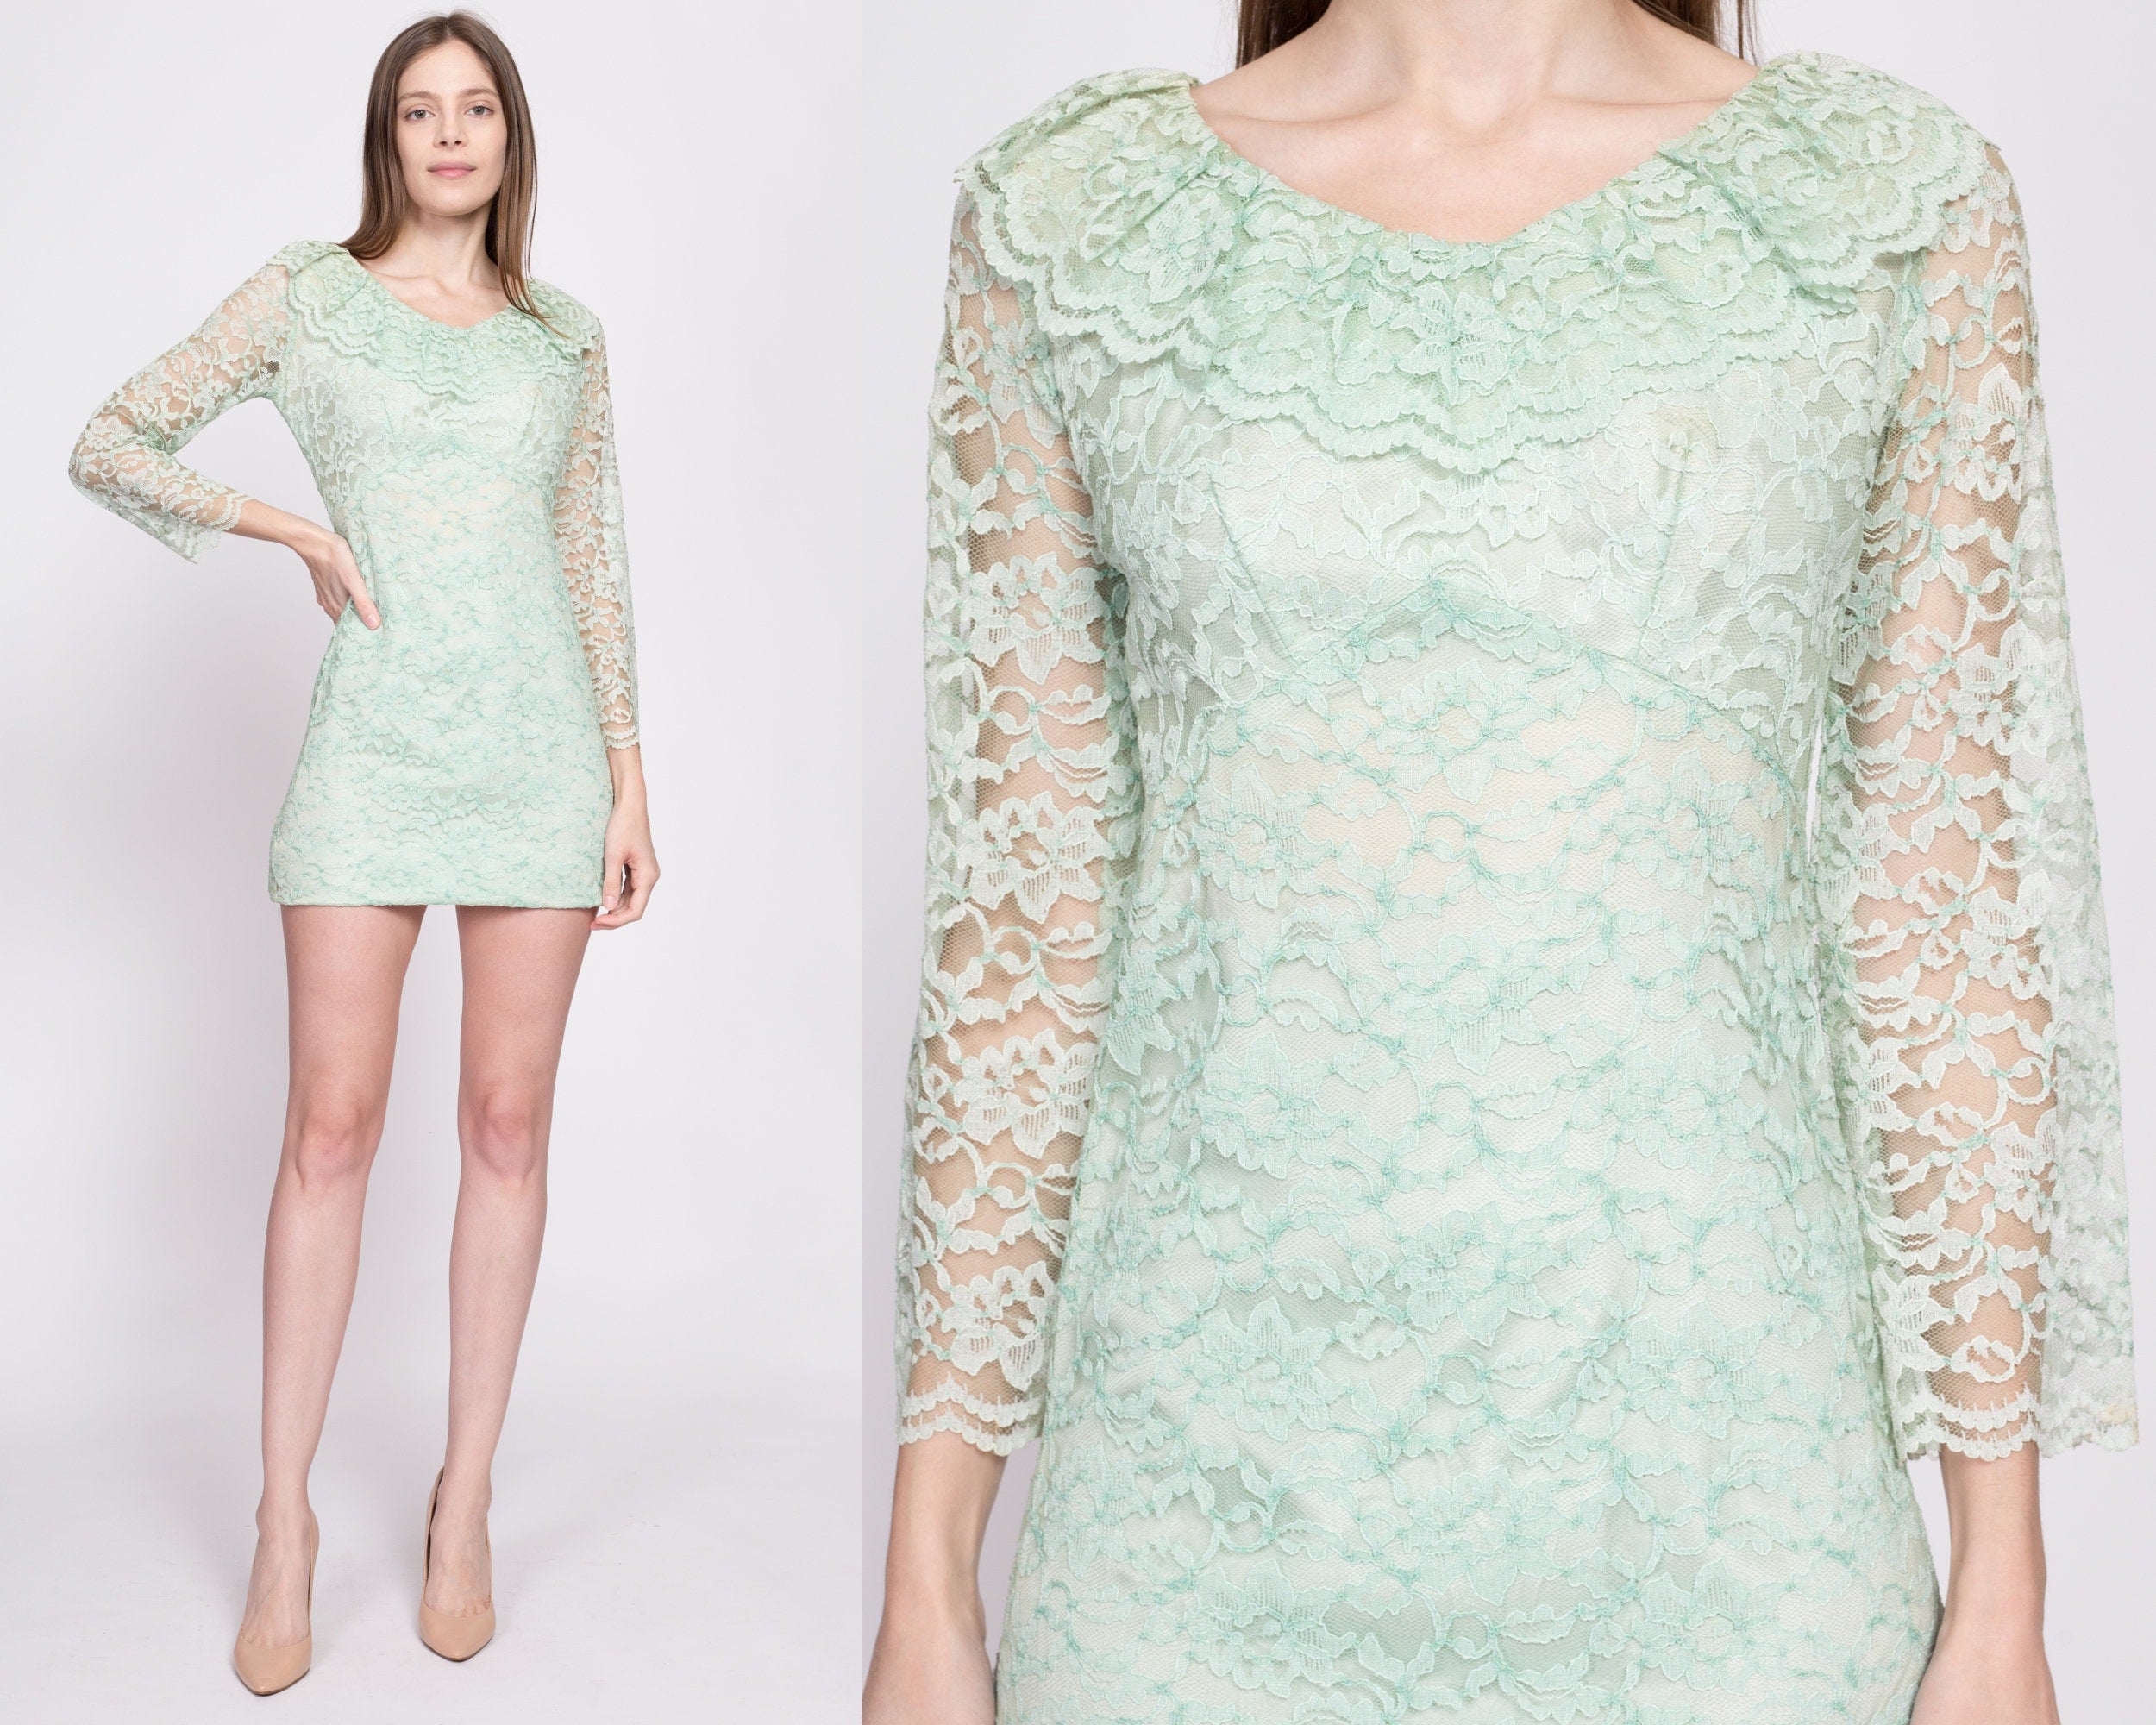 Chic mint green lace dress In A Variety Of Stylish Designs